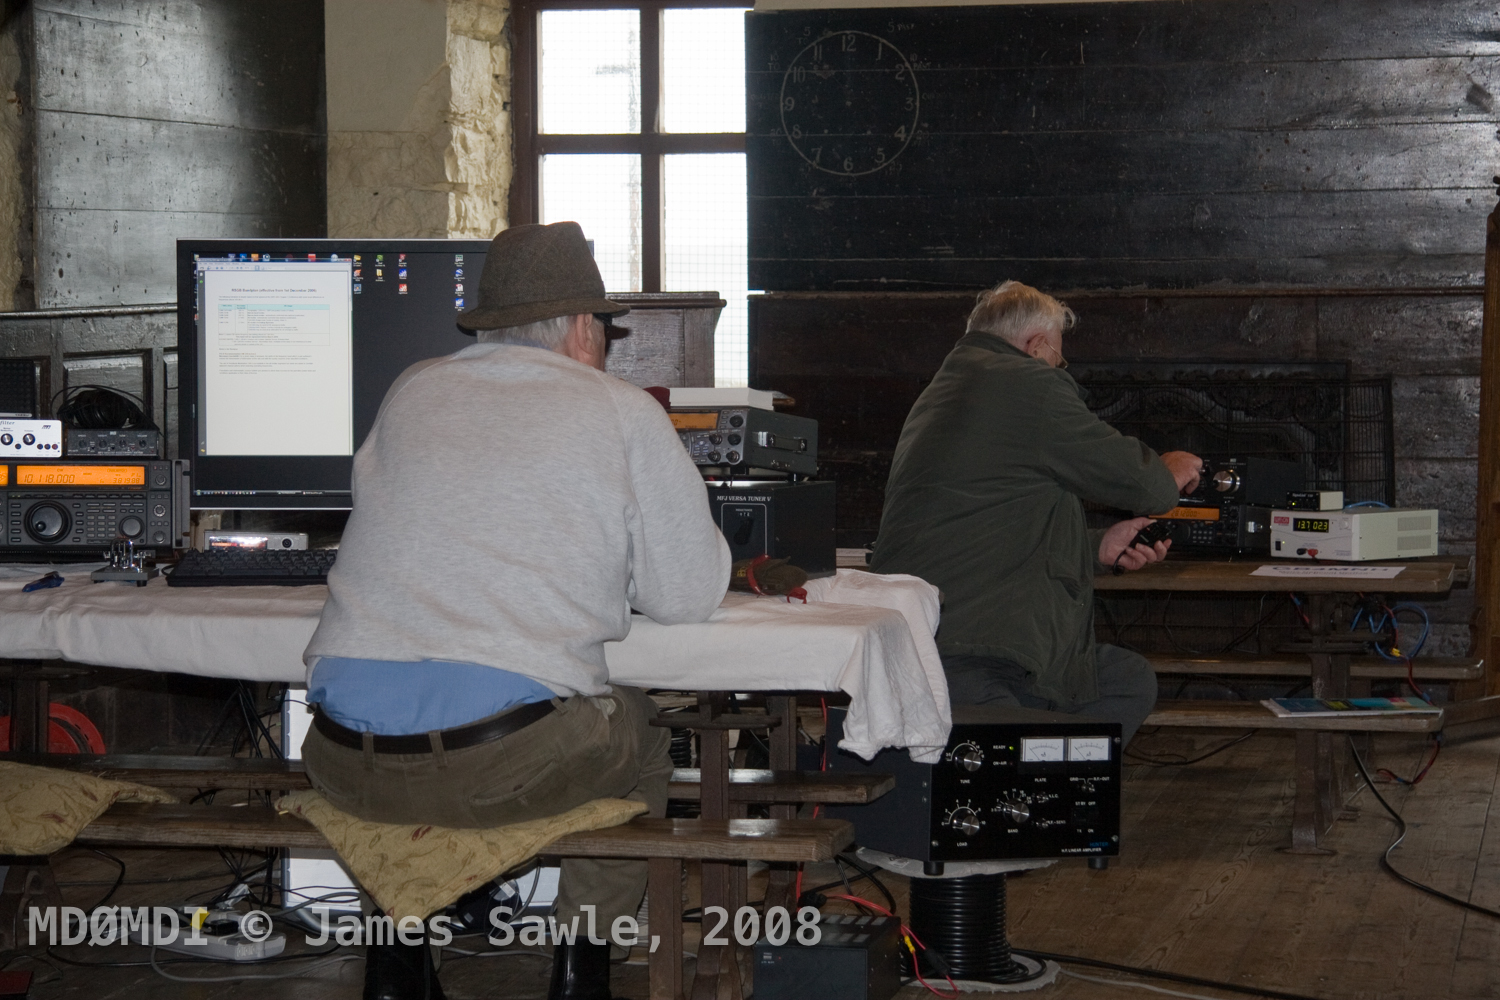 Harry Blackburn (MD0HEB) and Colin Ingles (MD0PWI) on the Radio in the Old Grammar School in Castletown, Isle of Man